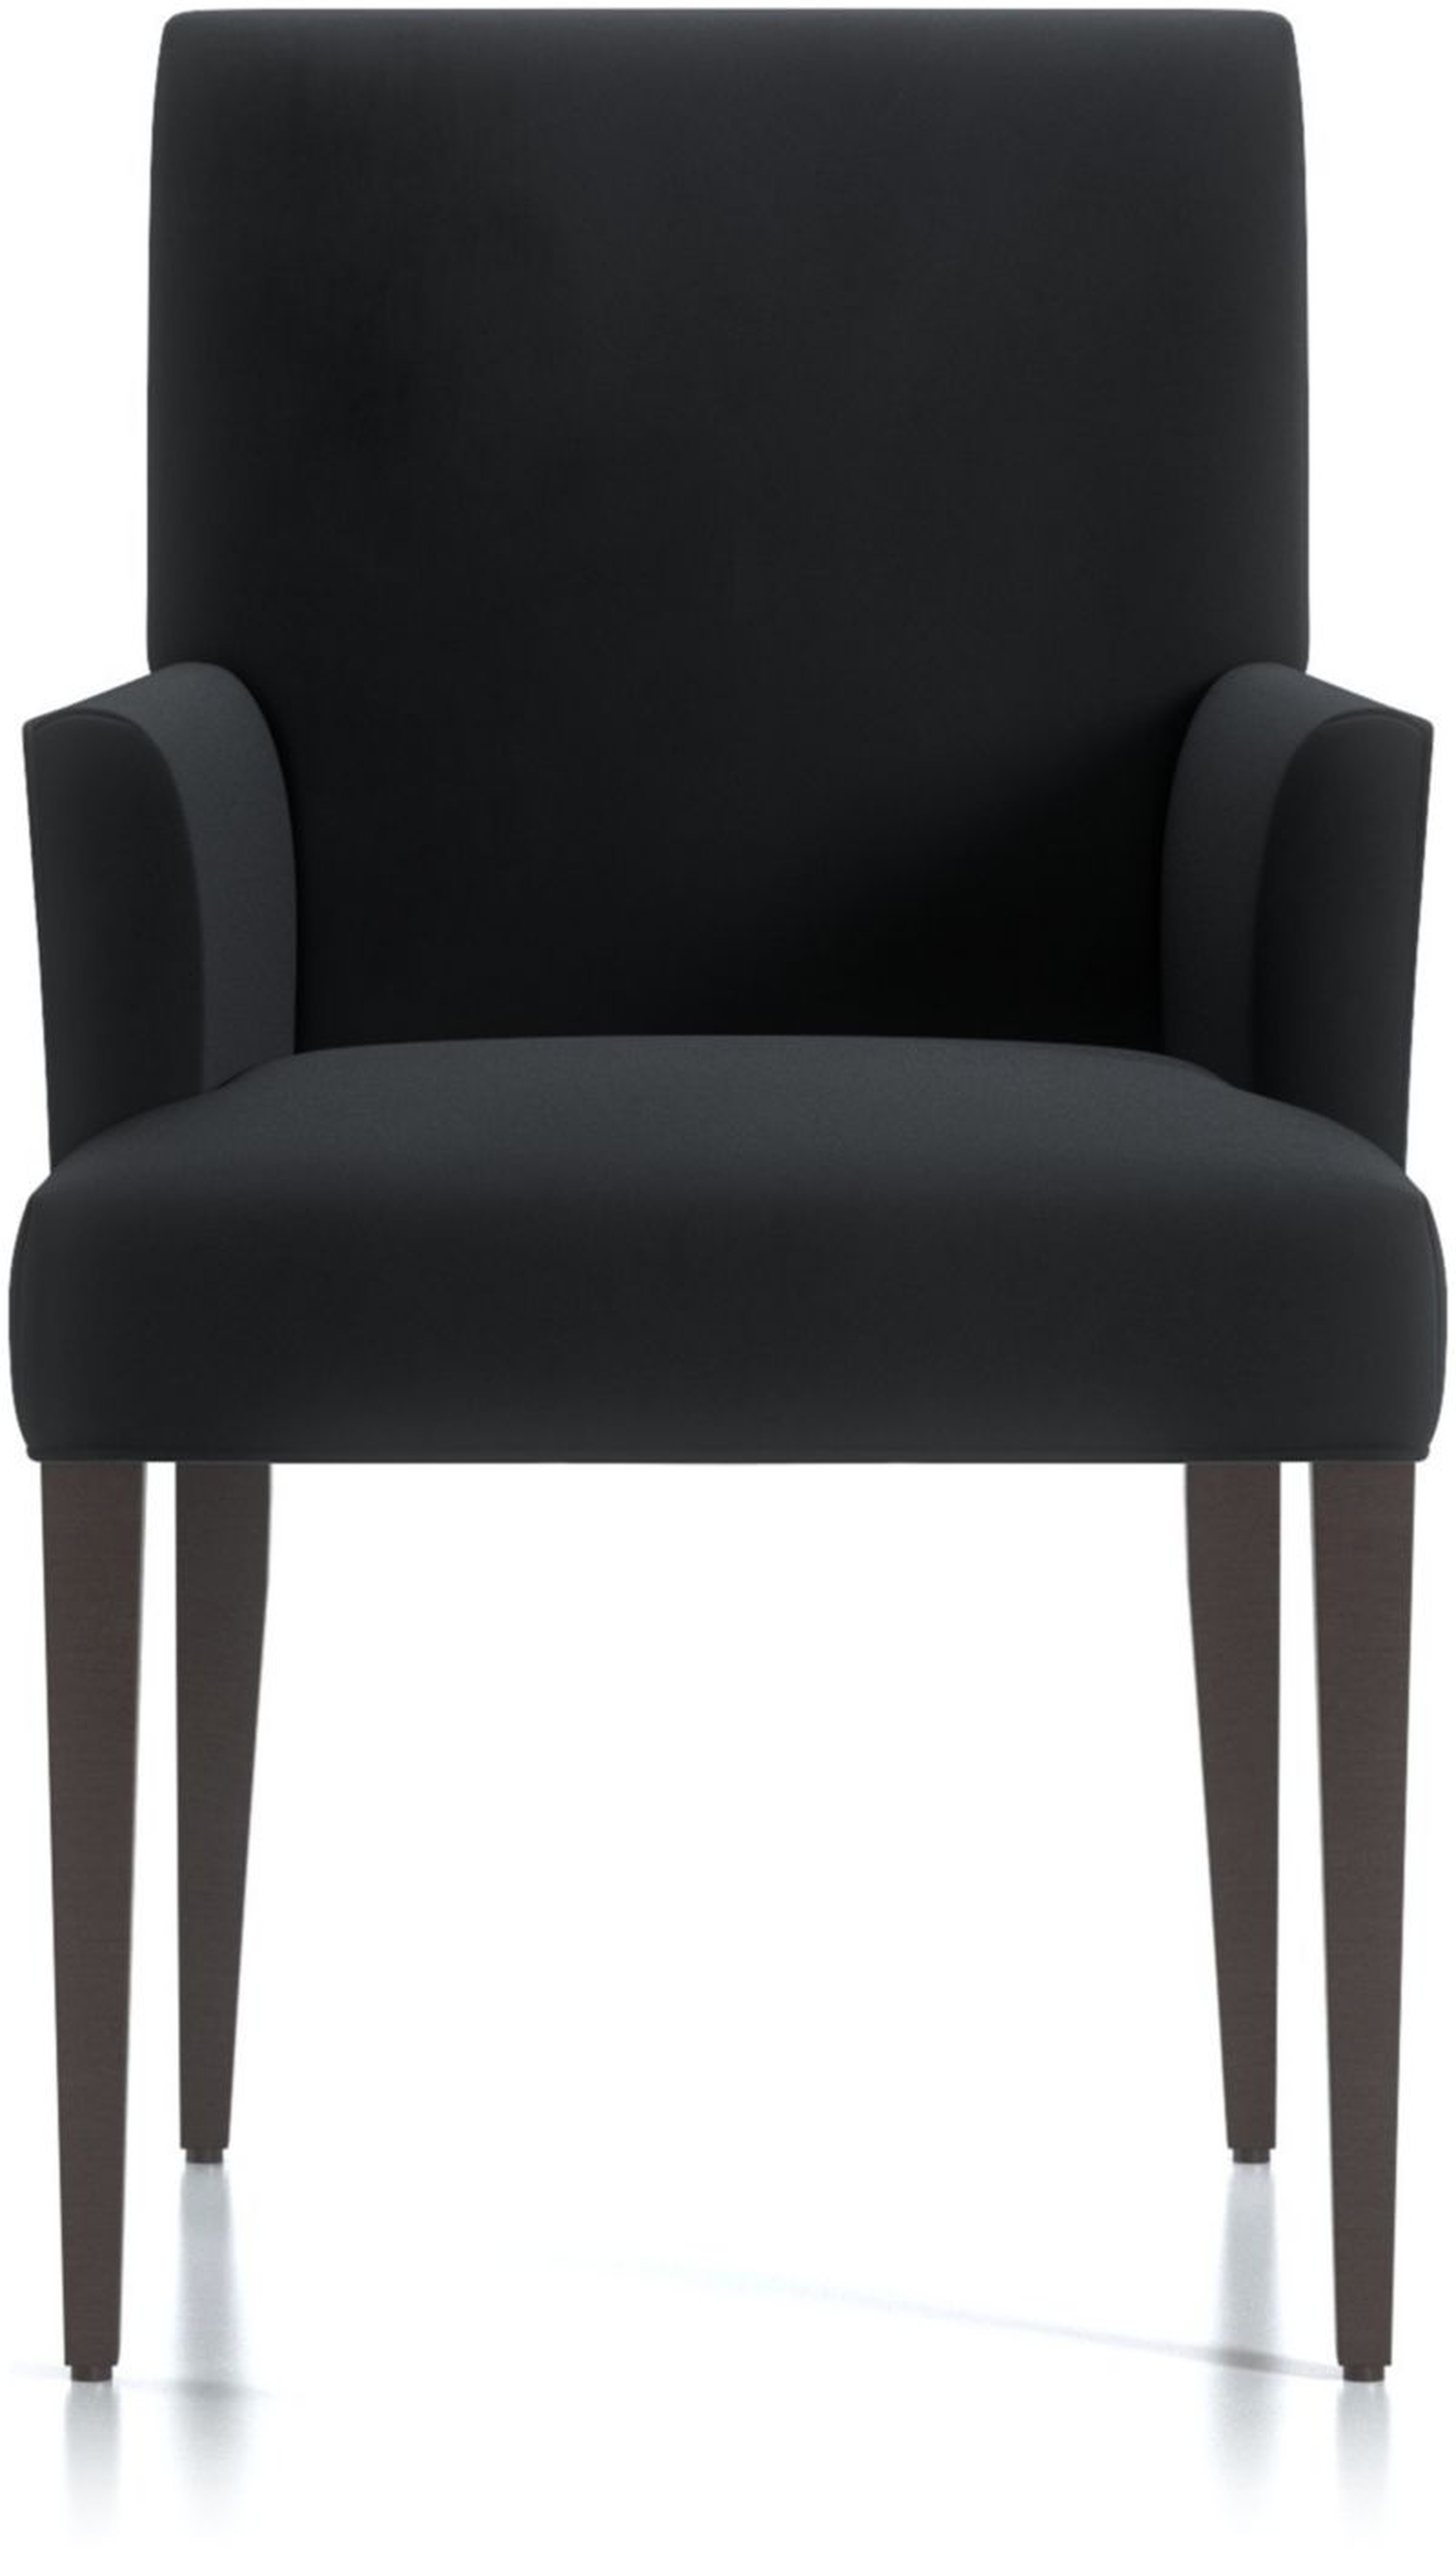 Miles Upholstered Dining Arm Chair - Tobias, Gravel - Crate and Barrel